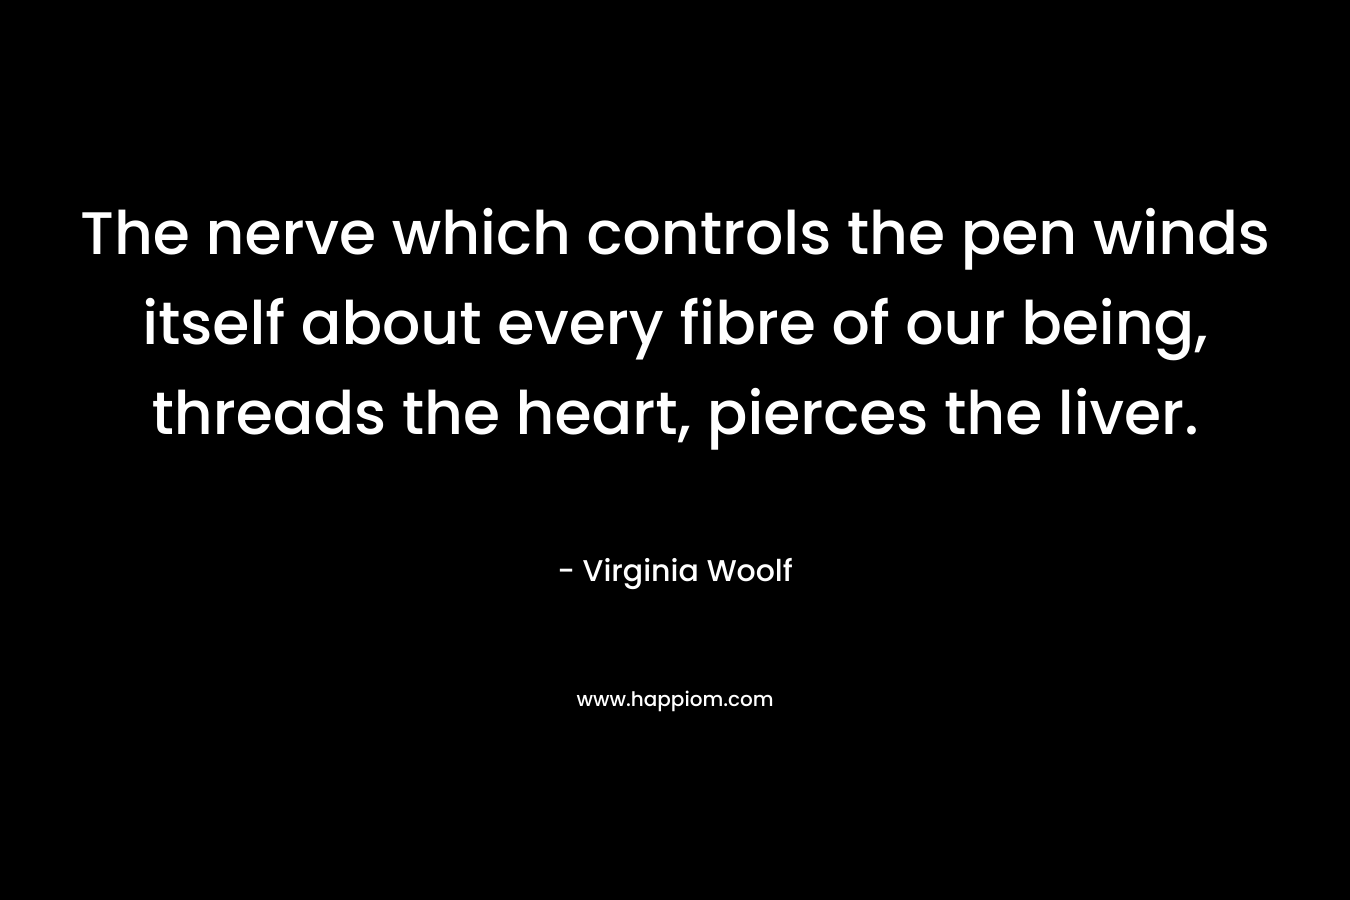 The nerve which controls the pen winds itself about every fibre of our being, threads the heart, pierces the liver. – Virginia Woolf